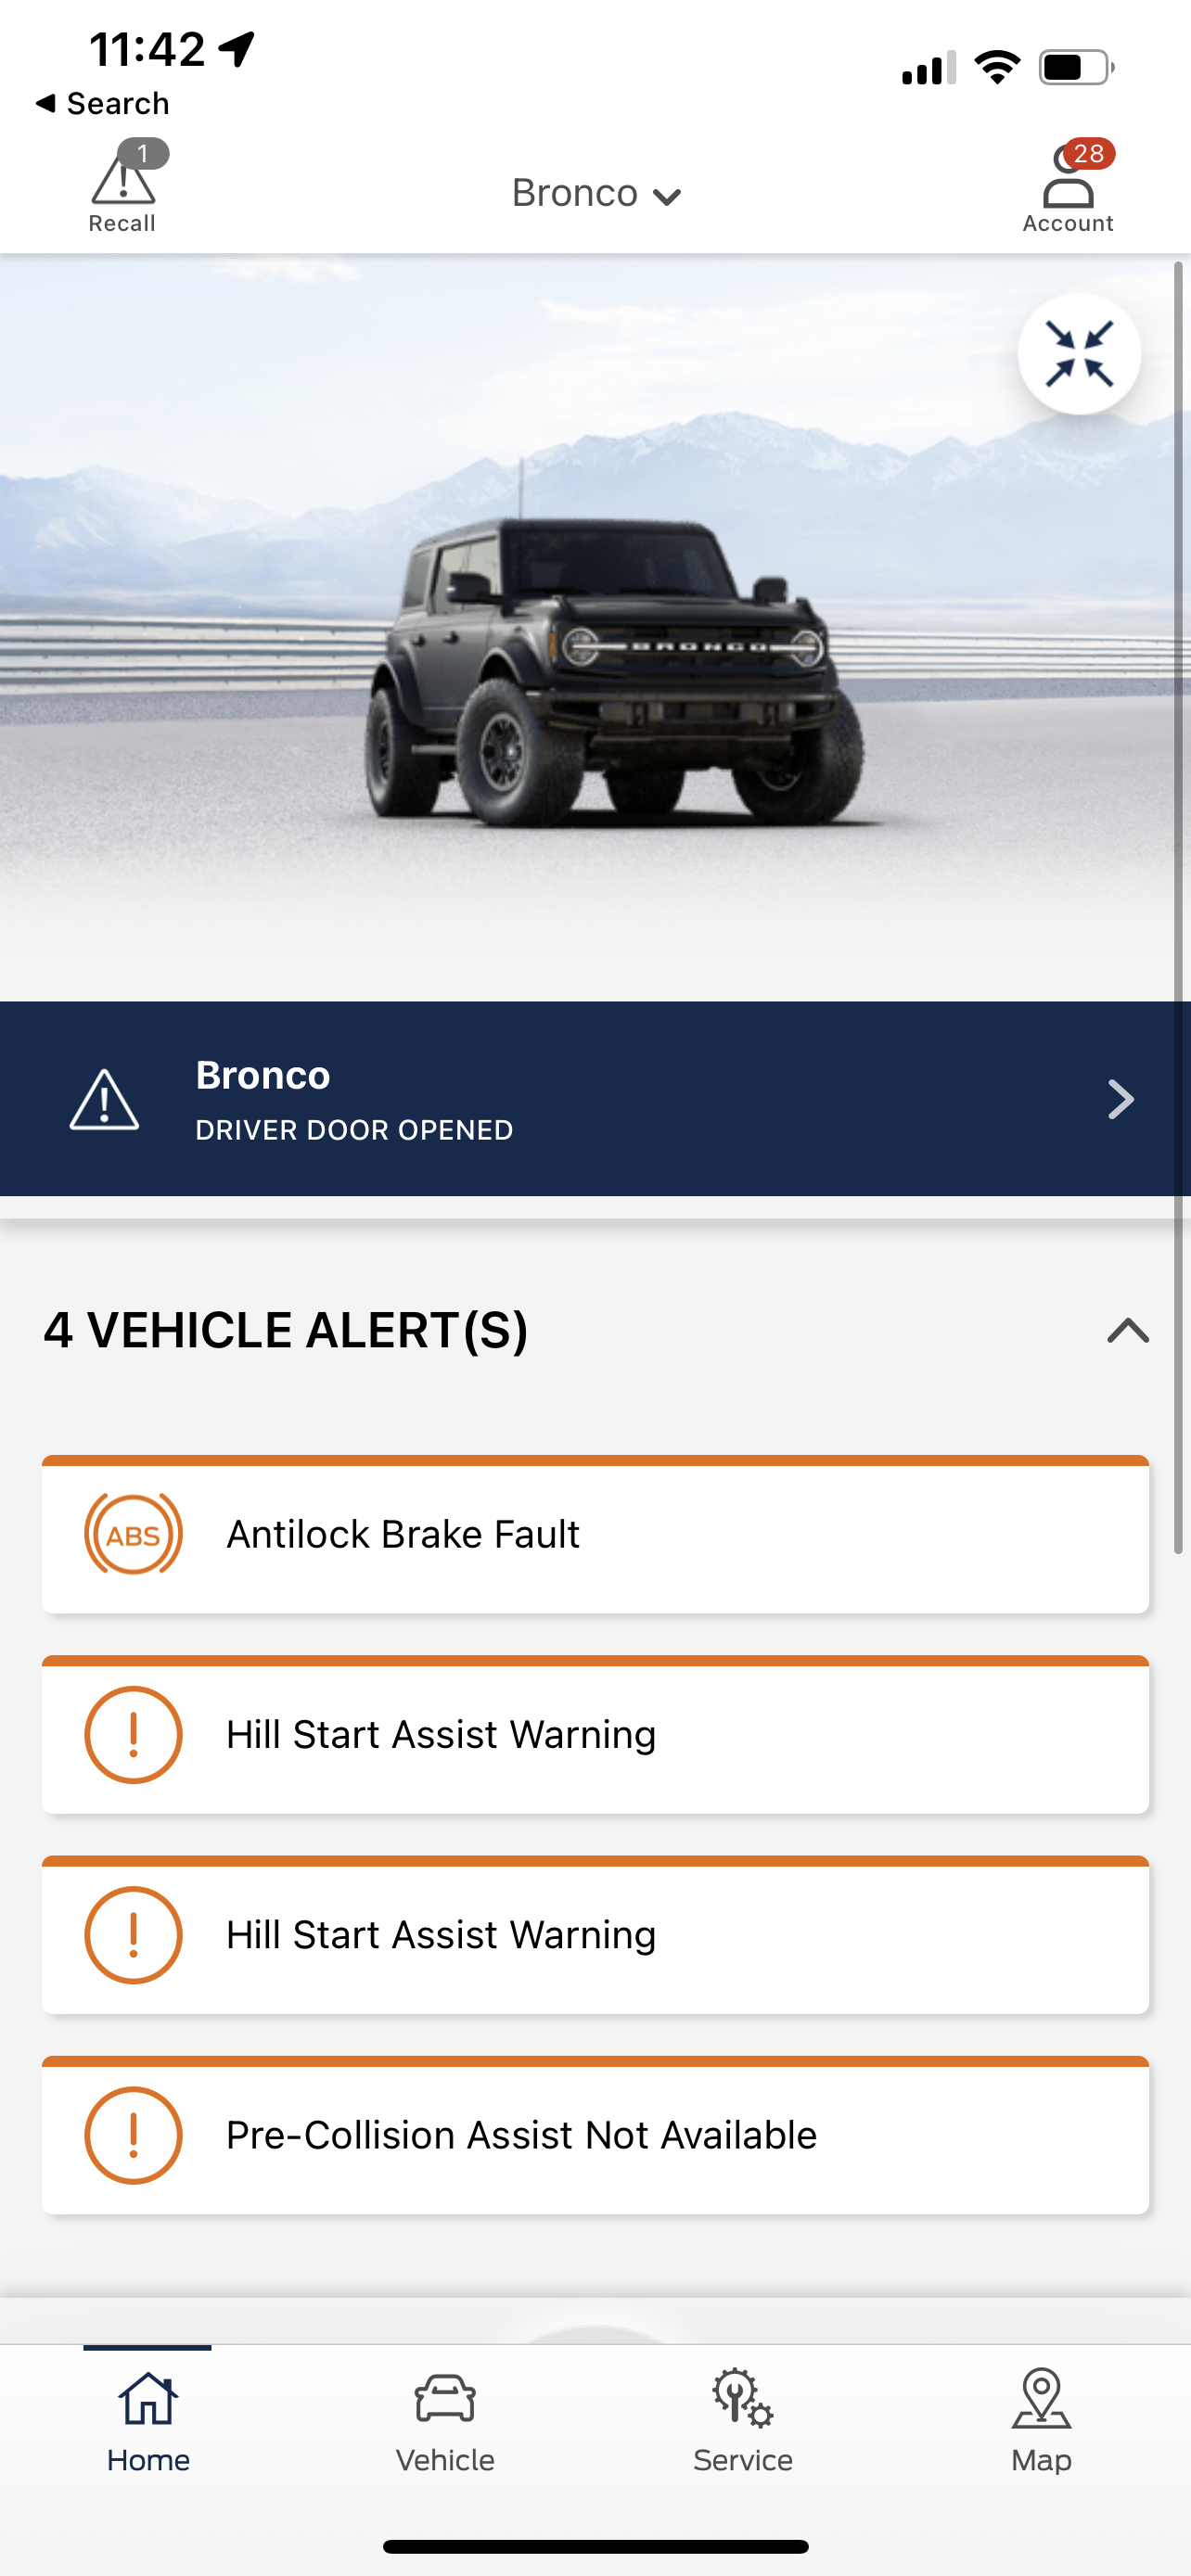 Ford Bronco Brakes Failure on highway - known issue according to dealership? IMG_4010.PNG